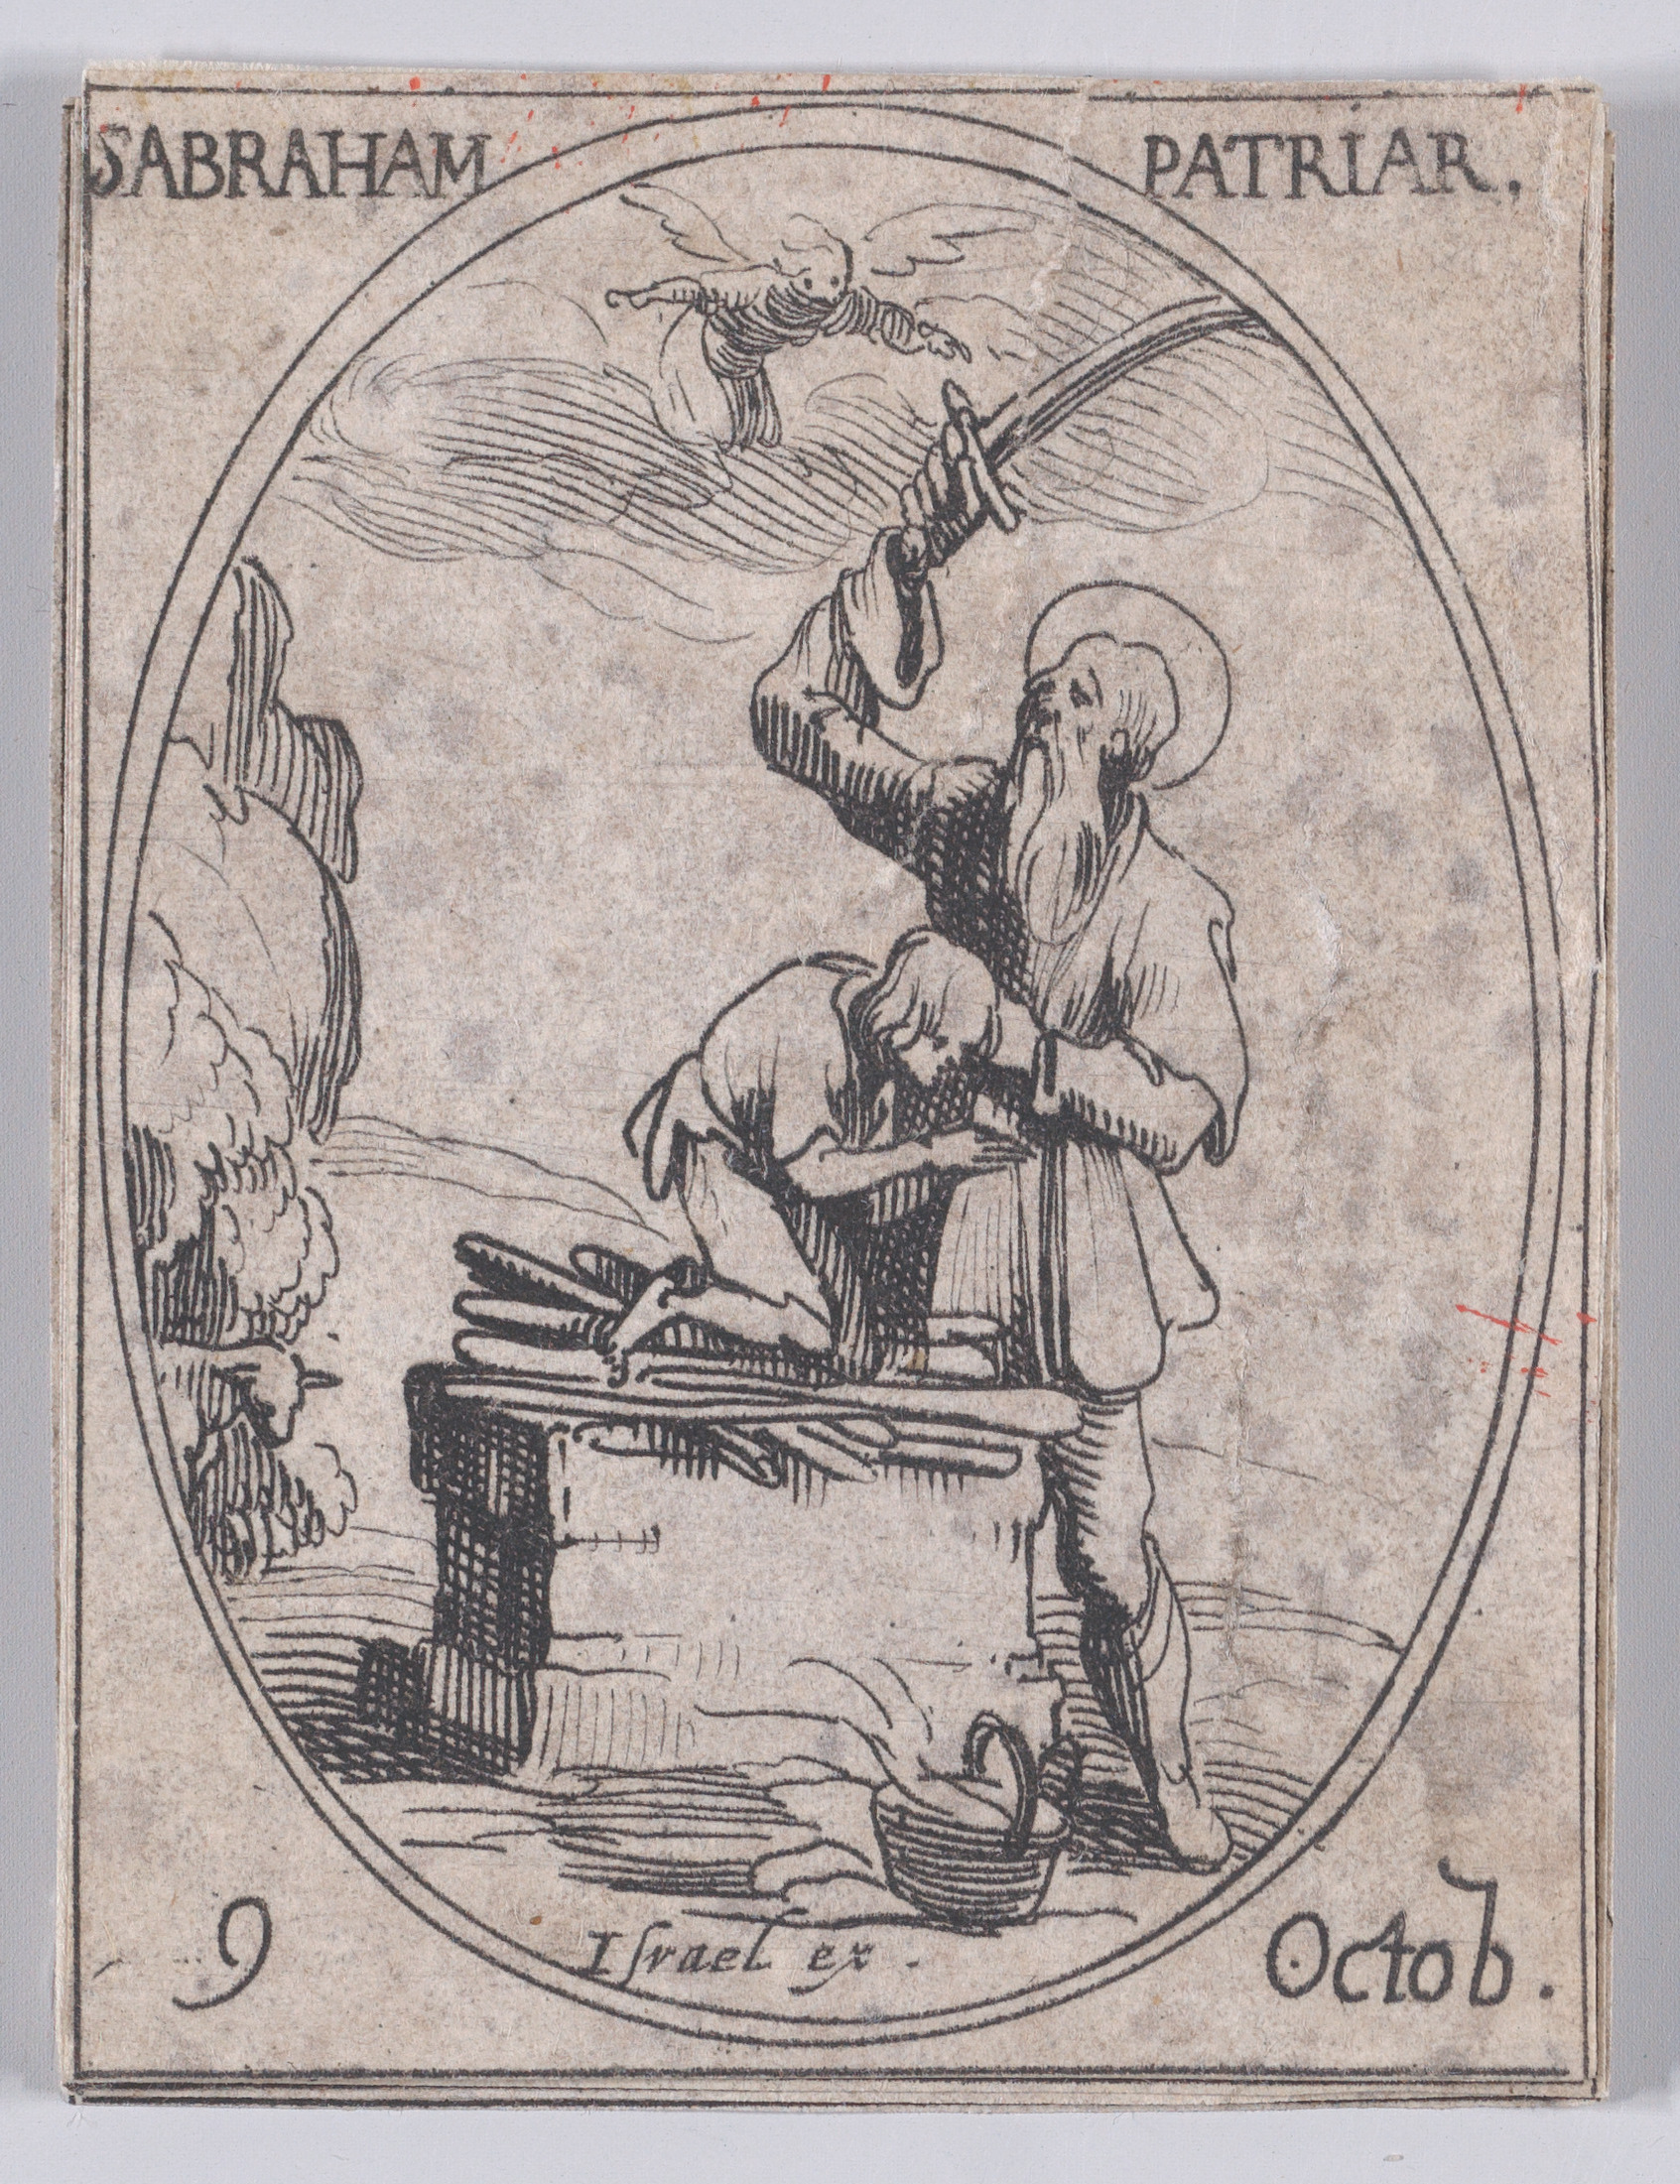 S. Abraham, patriarche (St. Abraham, Patriarch), October 9th, from Les Images De Tous Les Saincts et Saintes de L'Année (Images of All of the Saints and Religious Events of the Year), Jacques Callot (French, Nancy 1592–1635 Nancy), Etching; second state of two (Lieure)